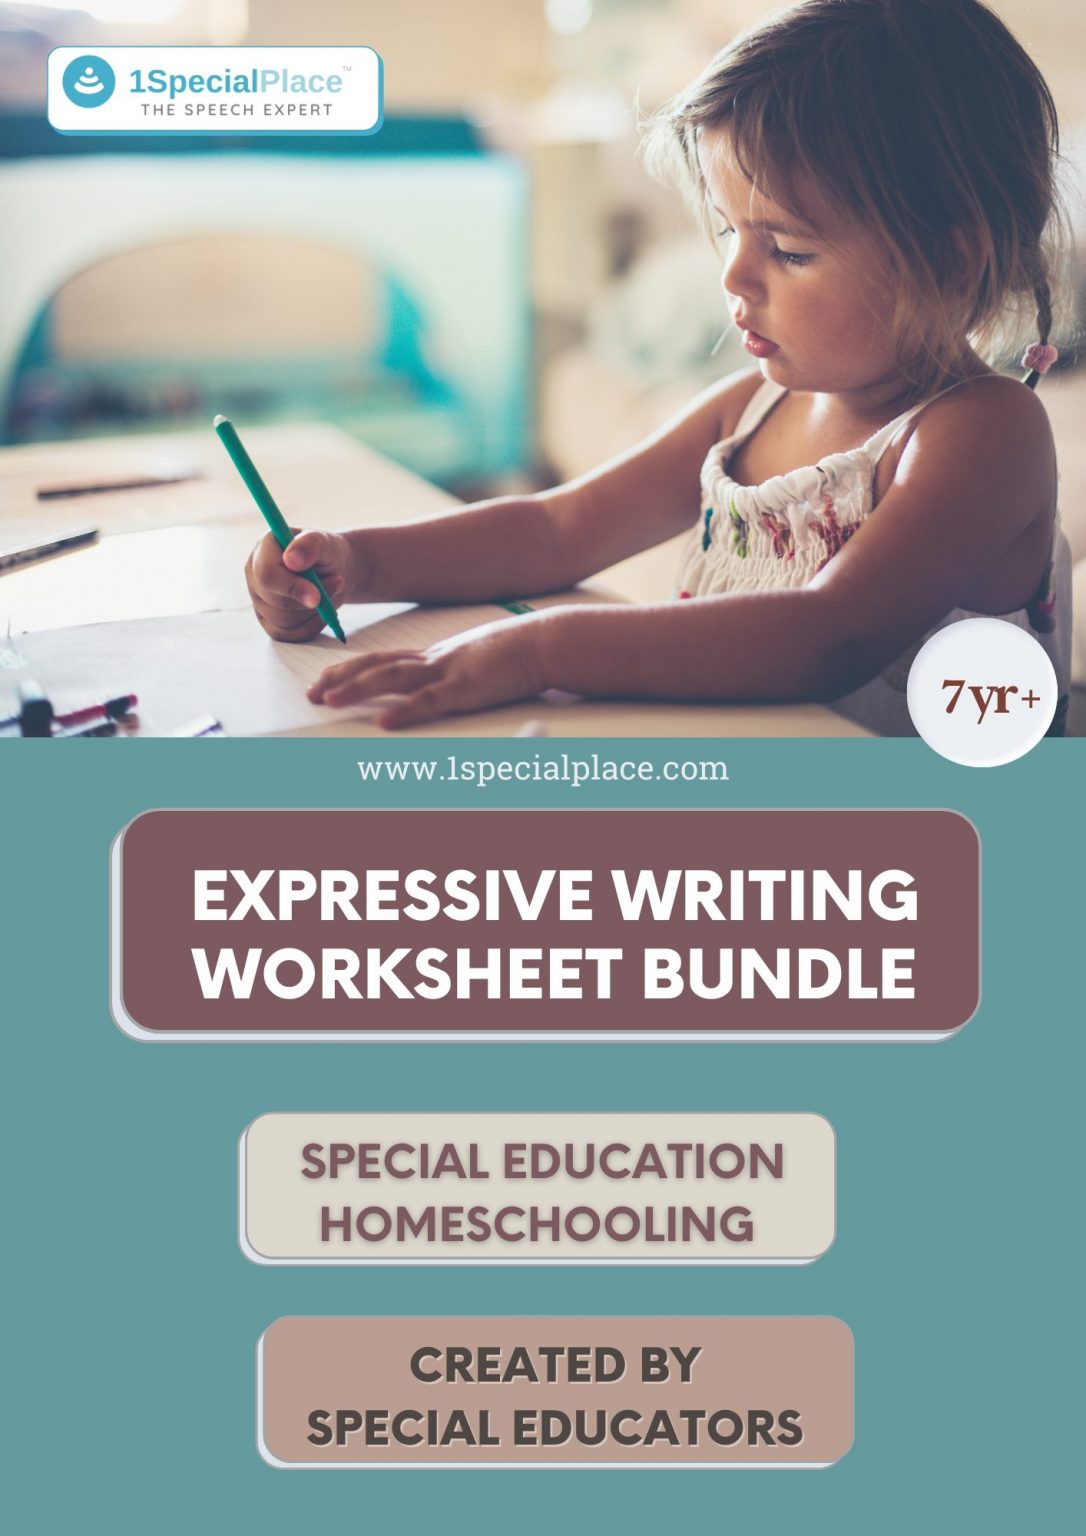 Expressive Writing Skills Worksheets - 1SpecialPlace